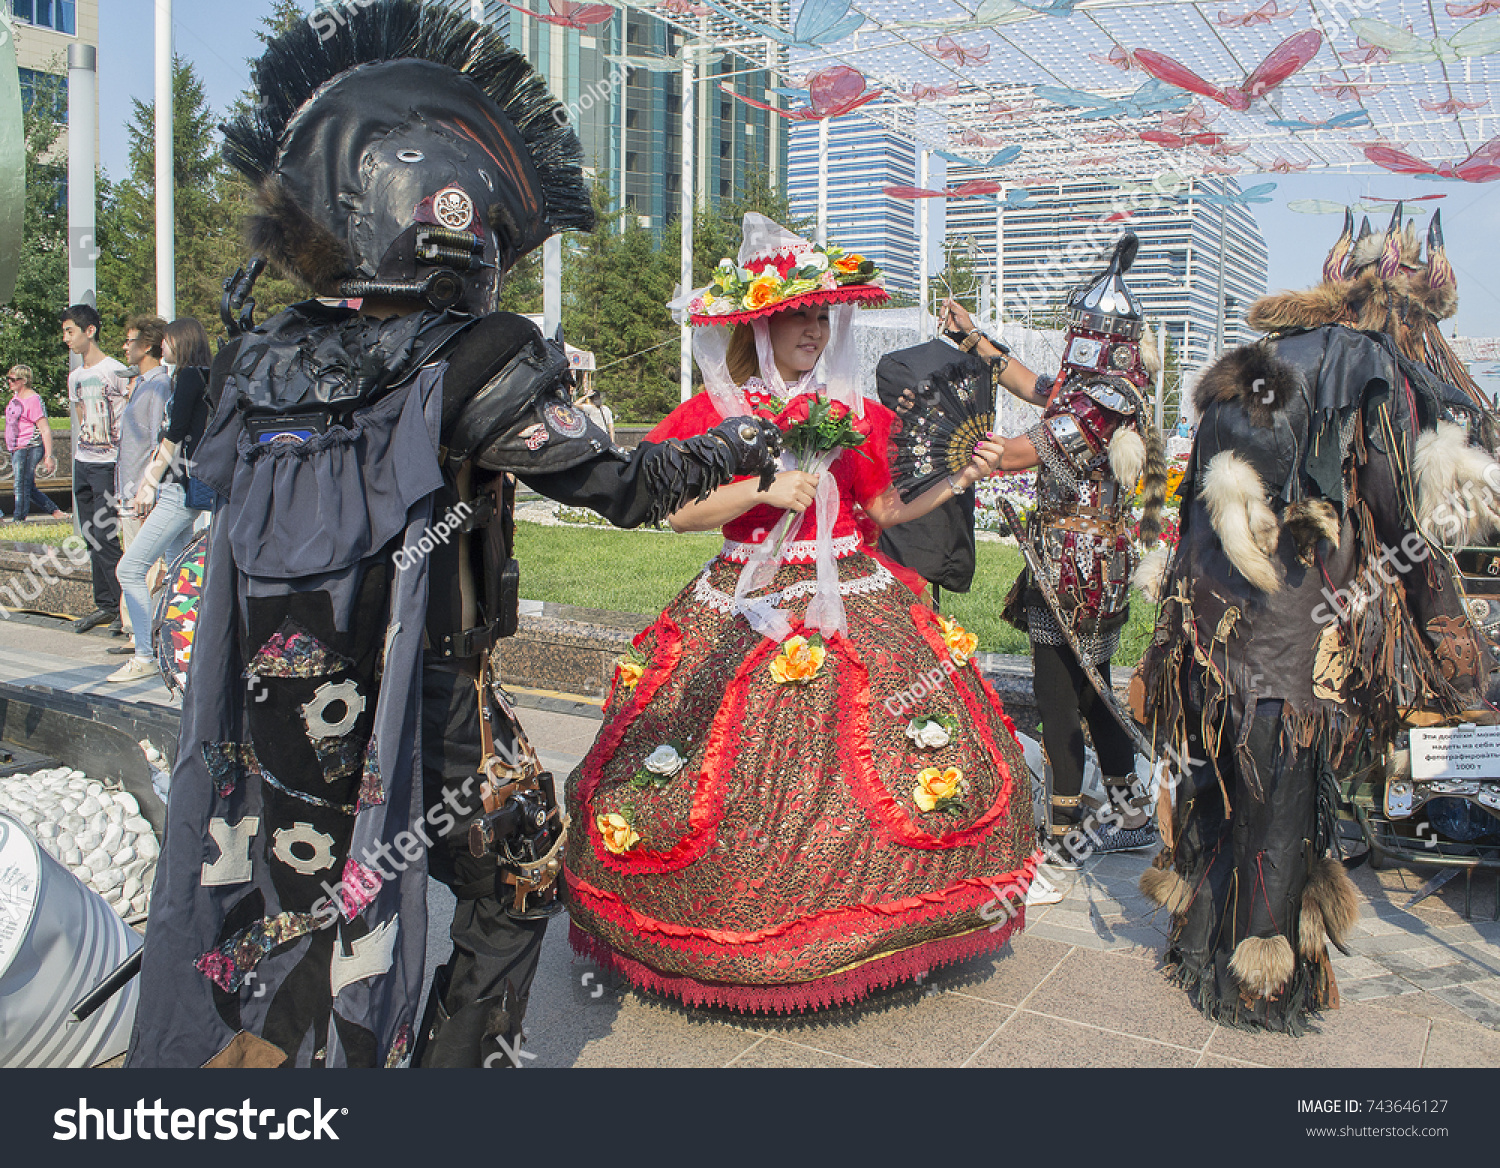 Astana, Kazakhstan - July 6, 2017: Street entertainment, costume hire. Young Kazakh woman in fancy dress of fairy & 3 men rigged out as knight, legionary & shaman #743646127